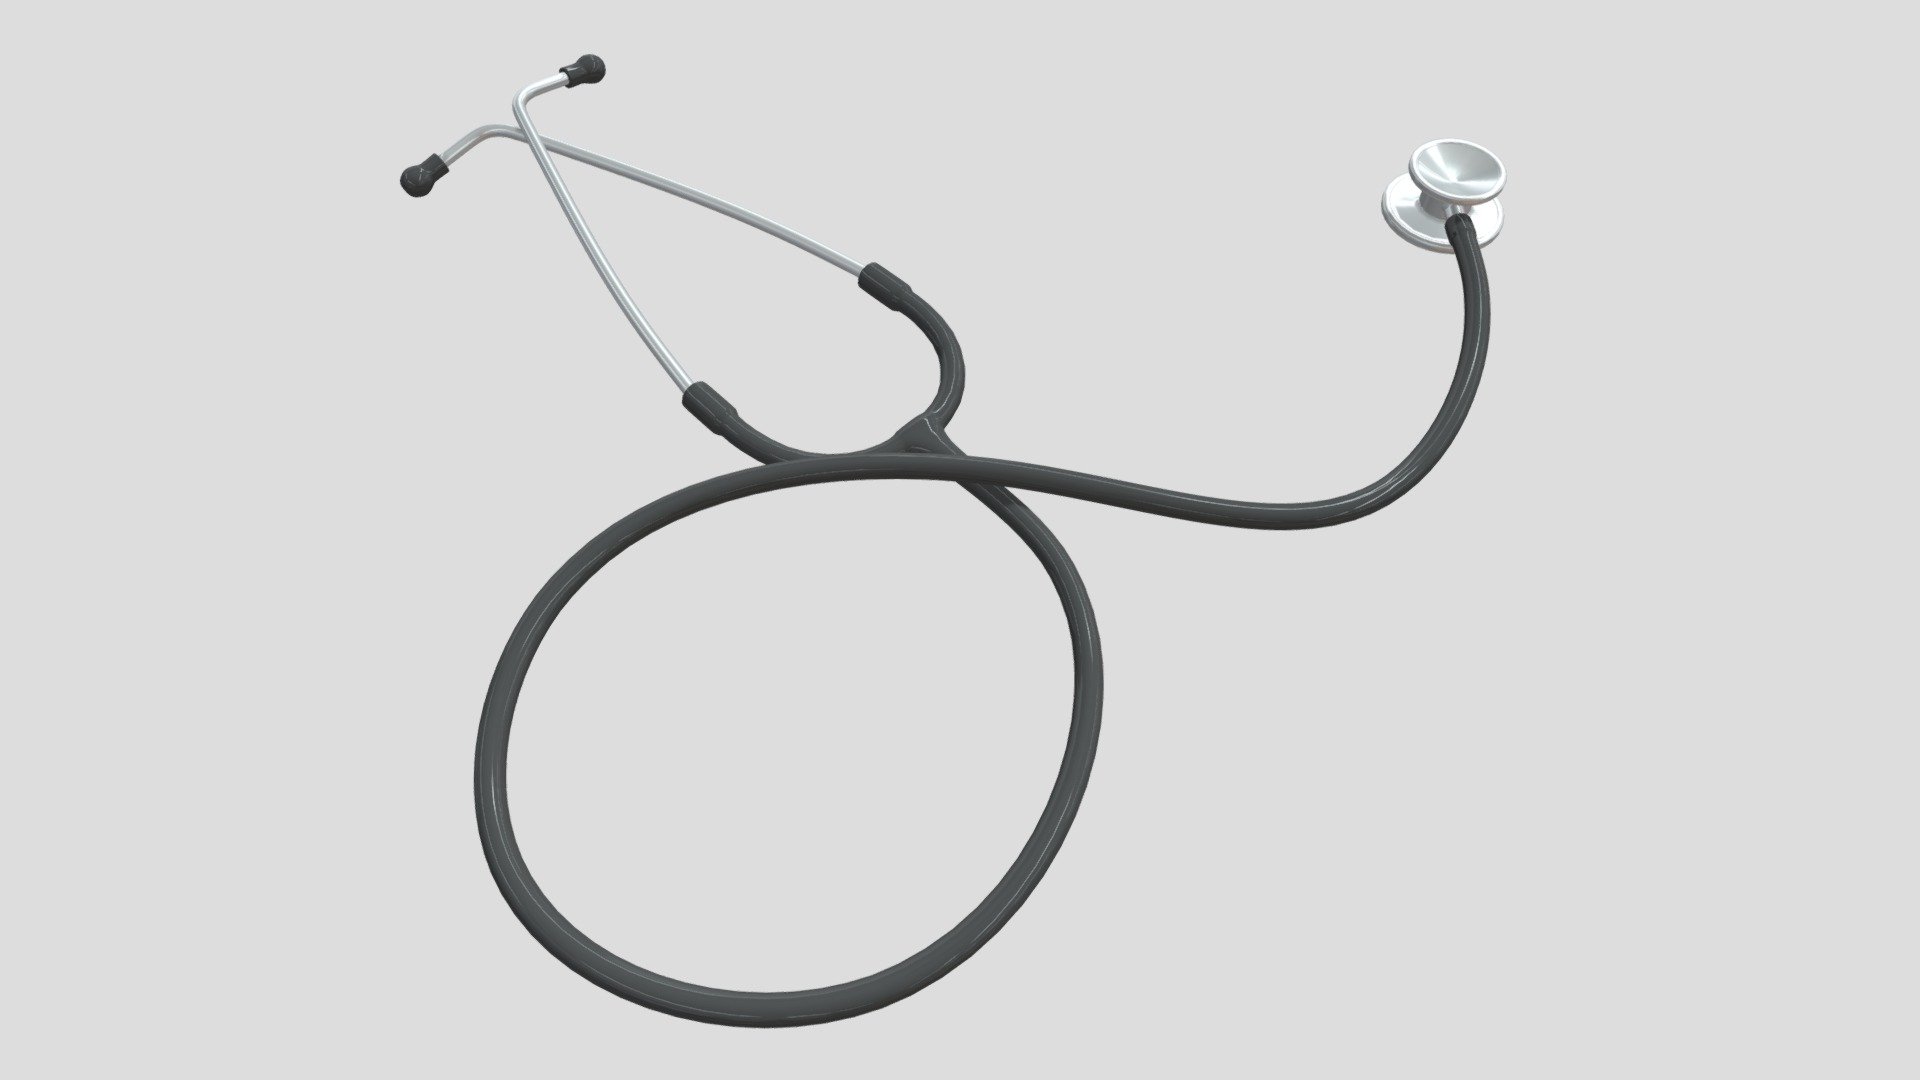 Stethoscope 3D model is a high quality, photo real model that will enhance detail and realism to any of your game projects or commercials. The model has a fully Shaded, detailed design that allows for close-up renders 3d model